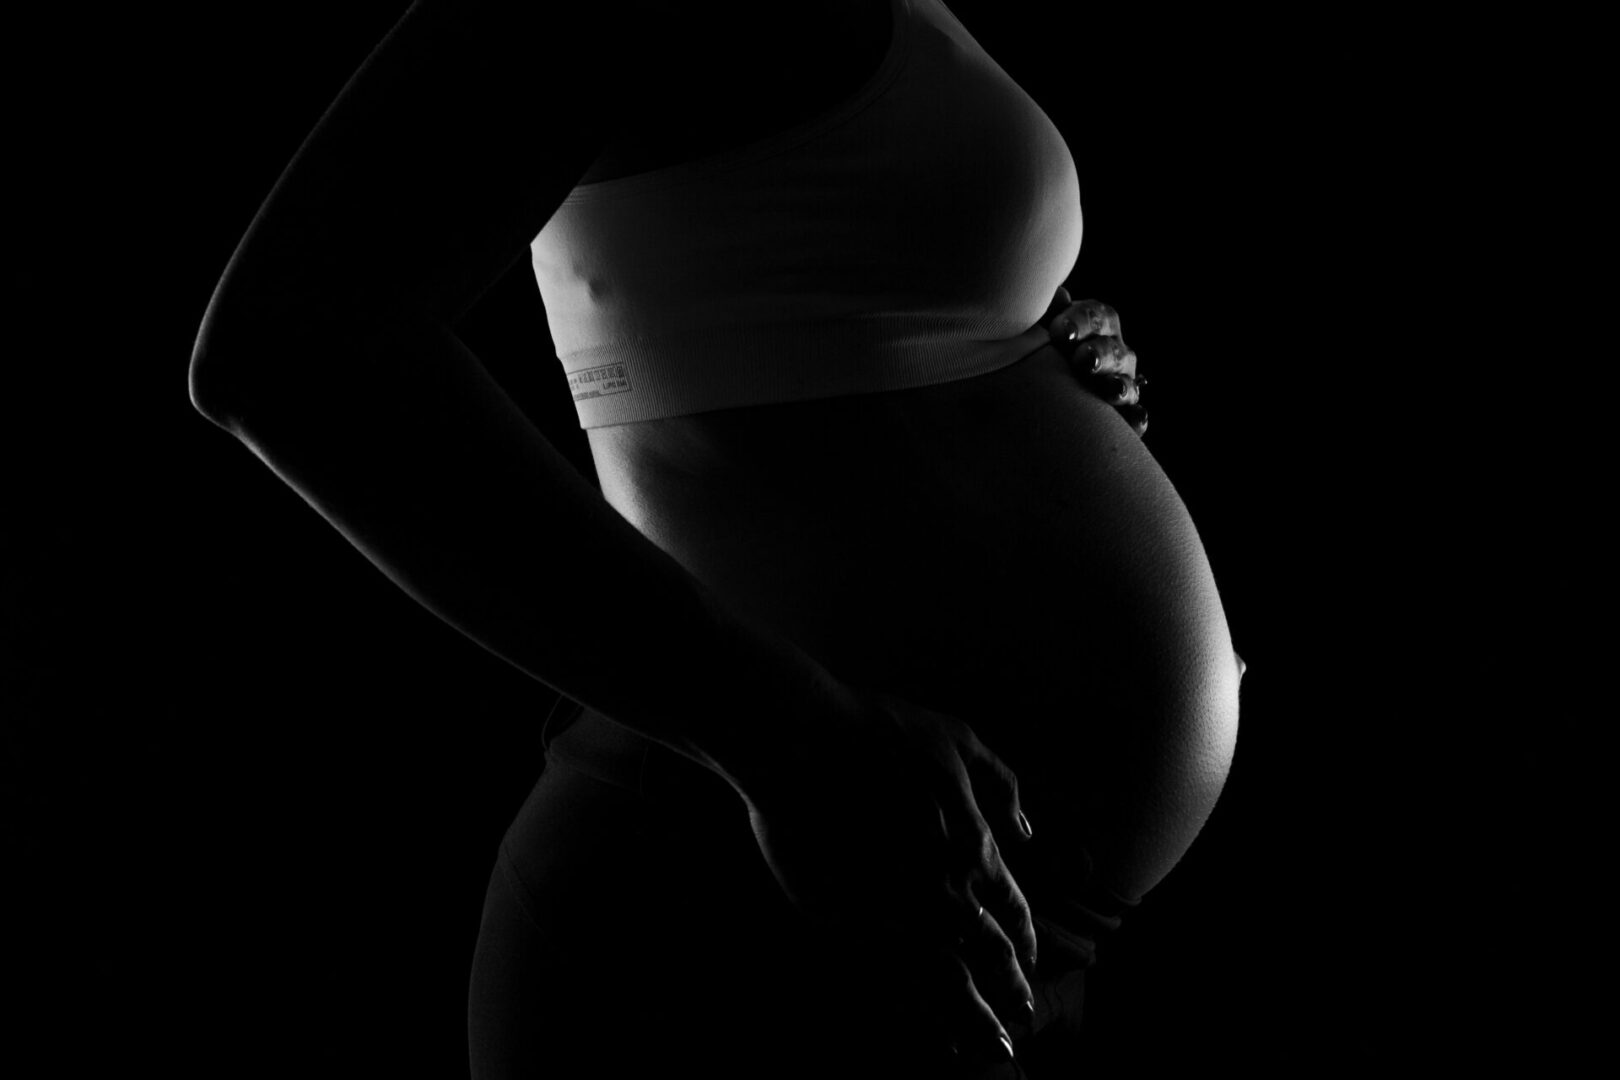 Black and white creative image of pregnant belly